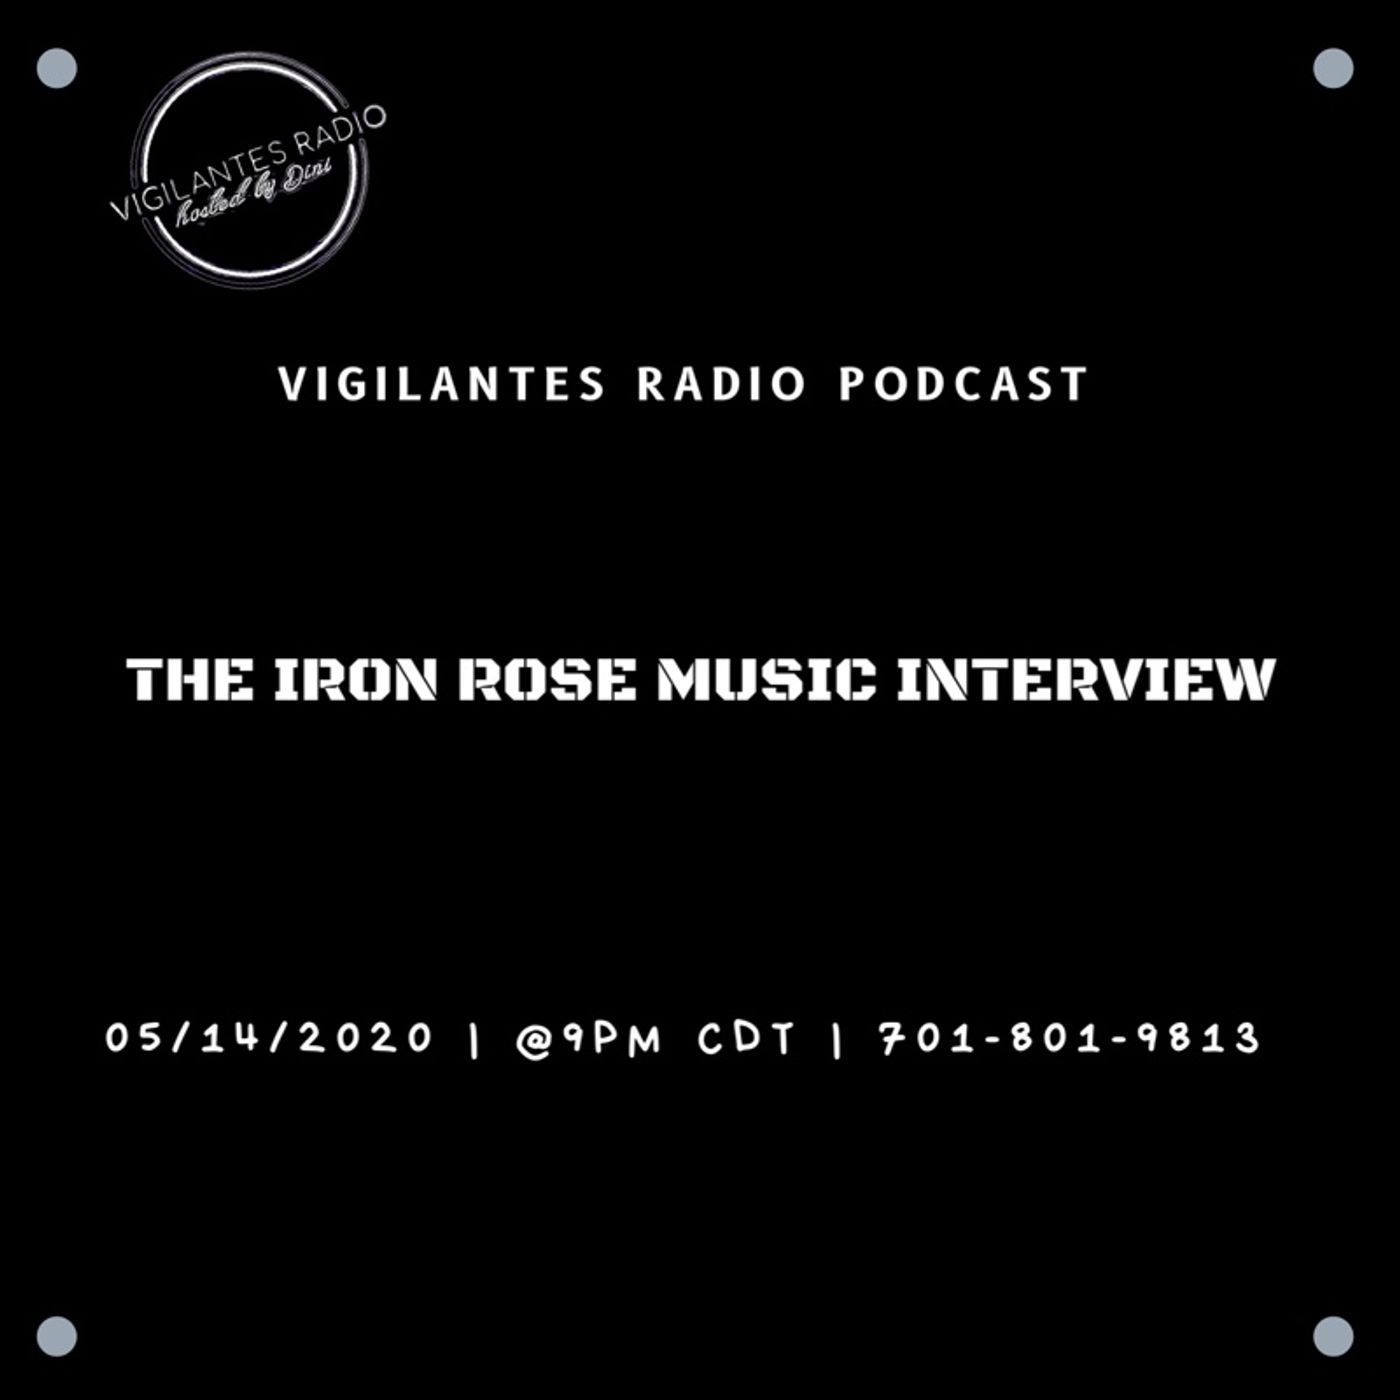 The Iron Rose Music Interview. Image